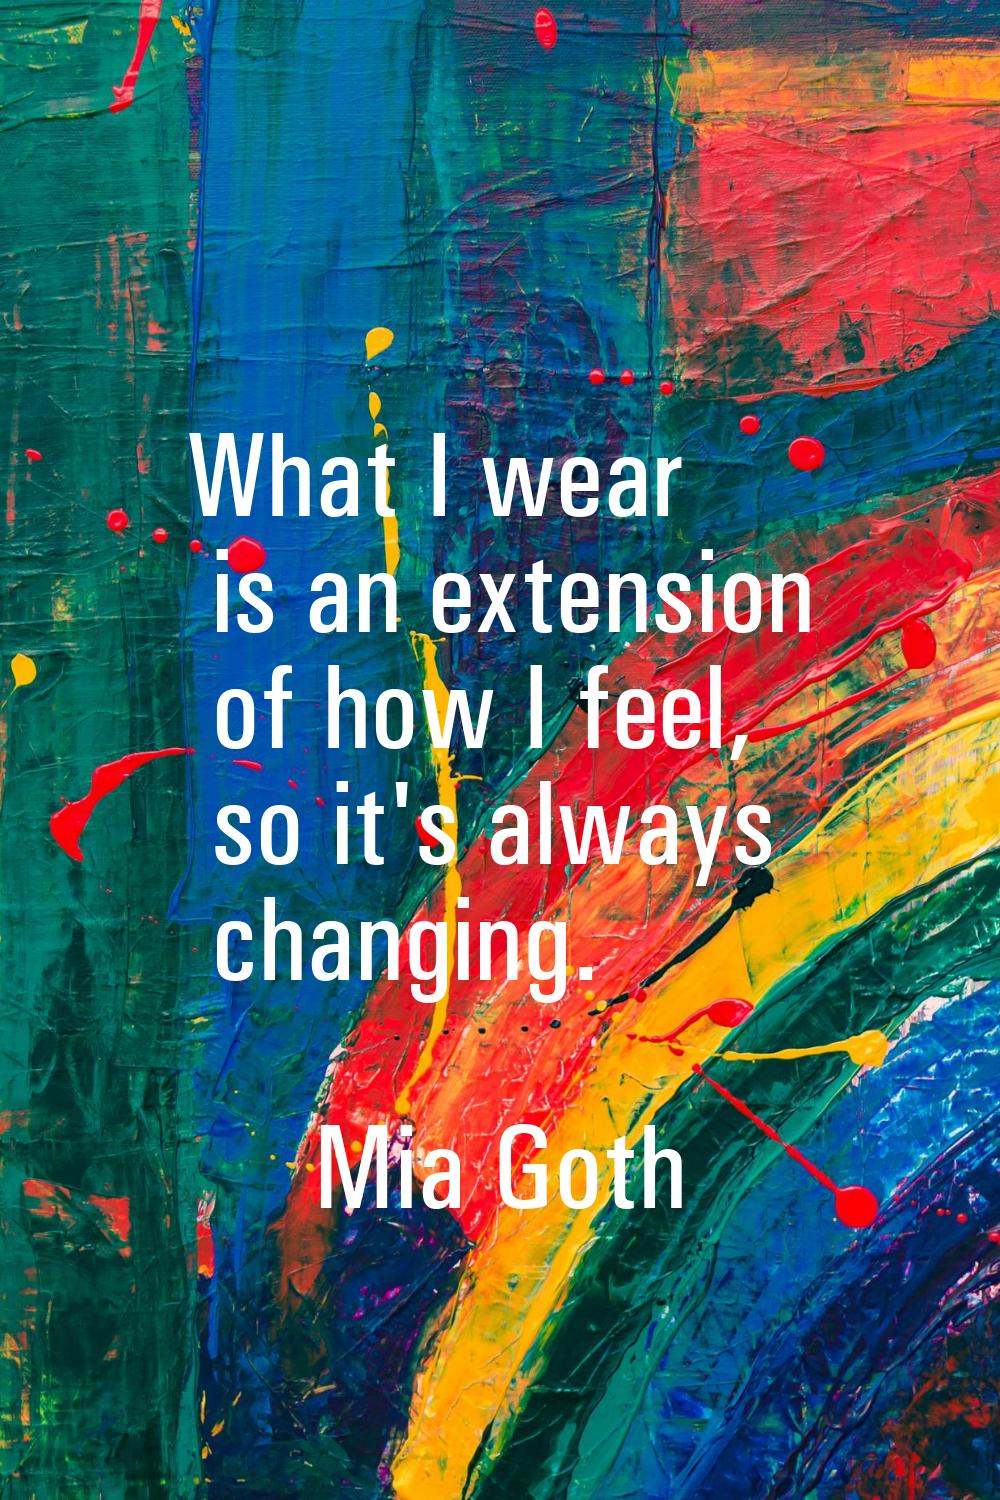 What I wear is an extension of how I feel, so it's always changing.